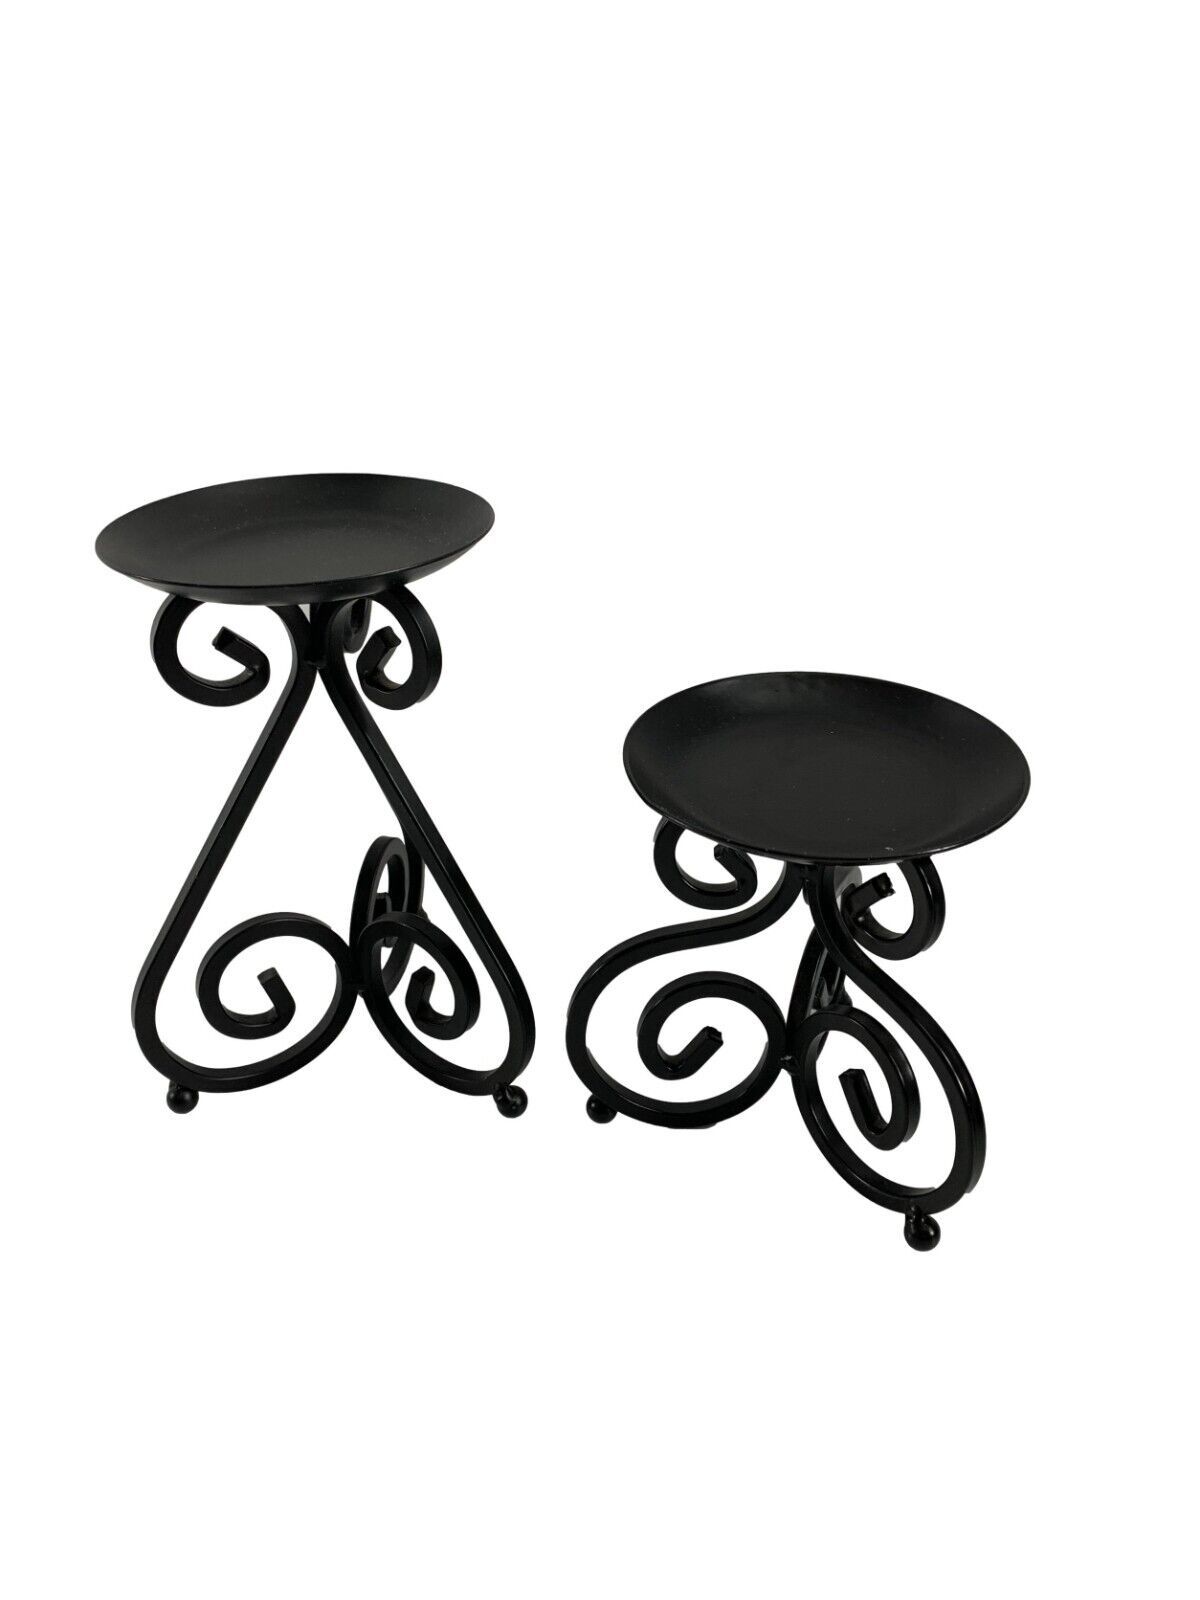 Lot of 2 Black Metal Pillar Candle Holders Hobby Lobby 7" 5" Swirls Table Top - $14.85